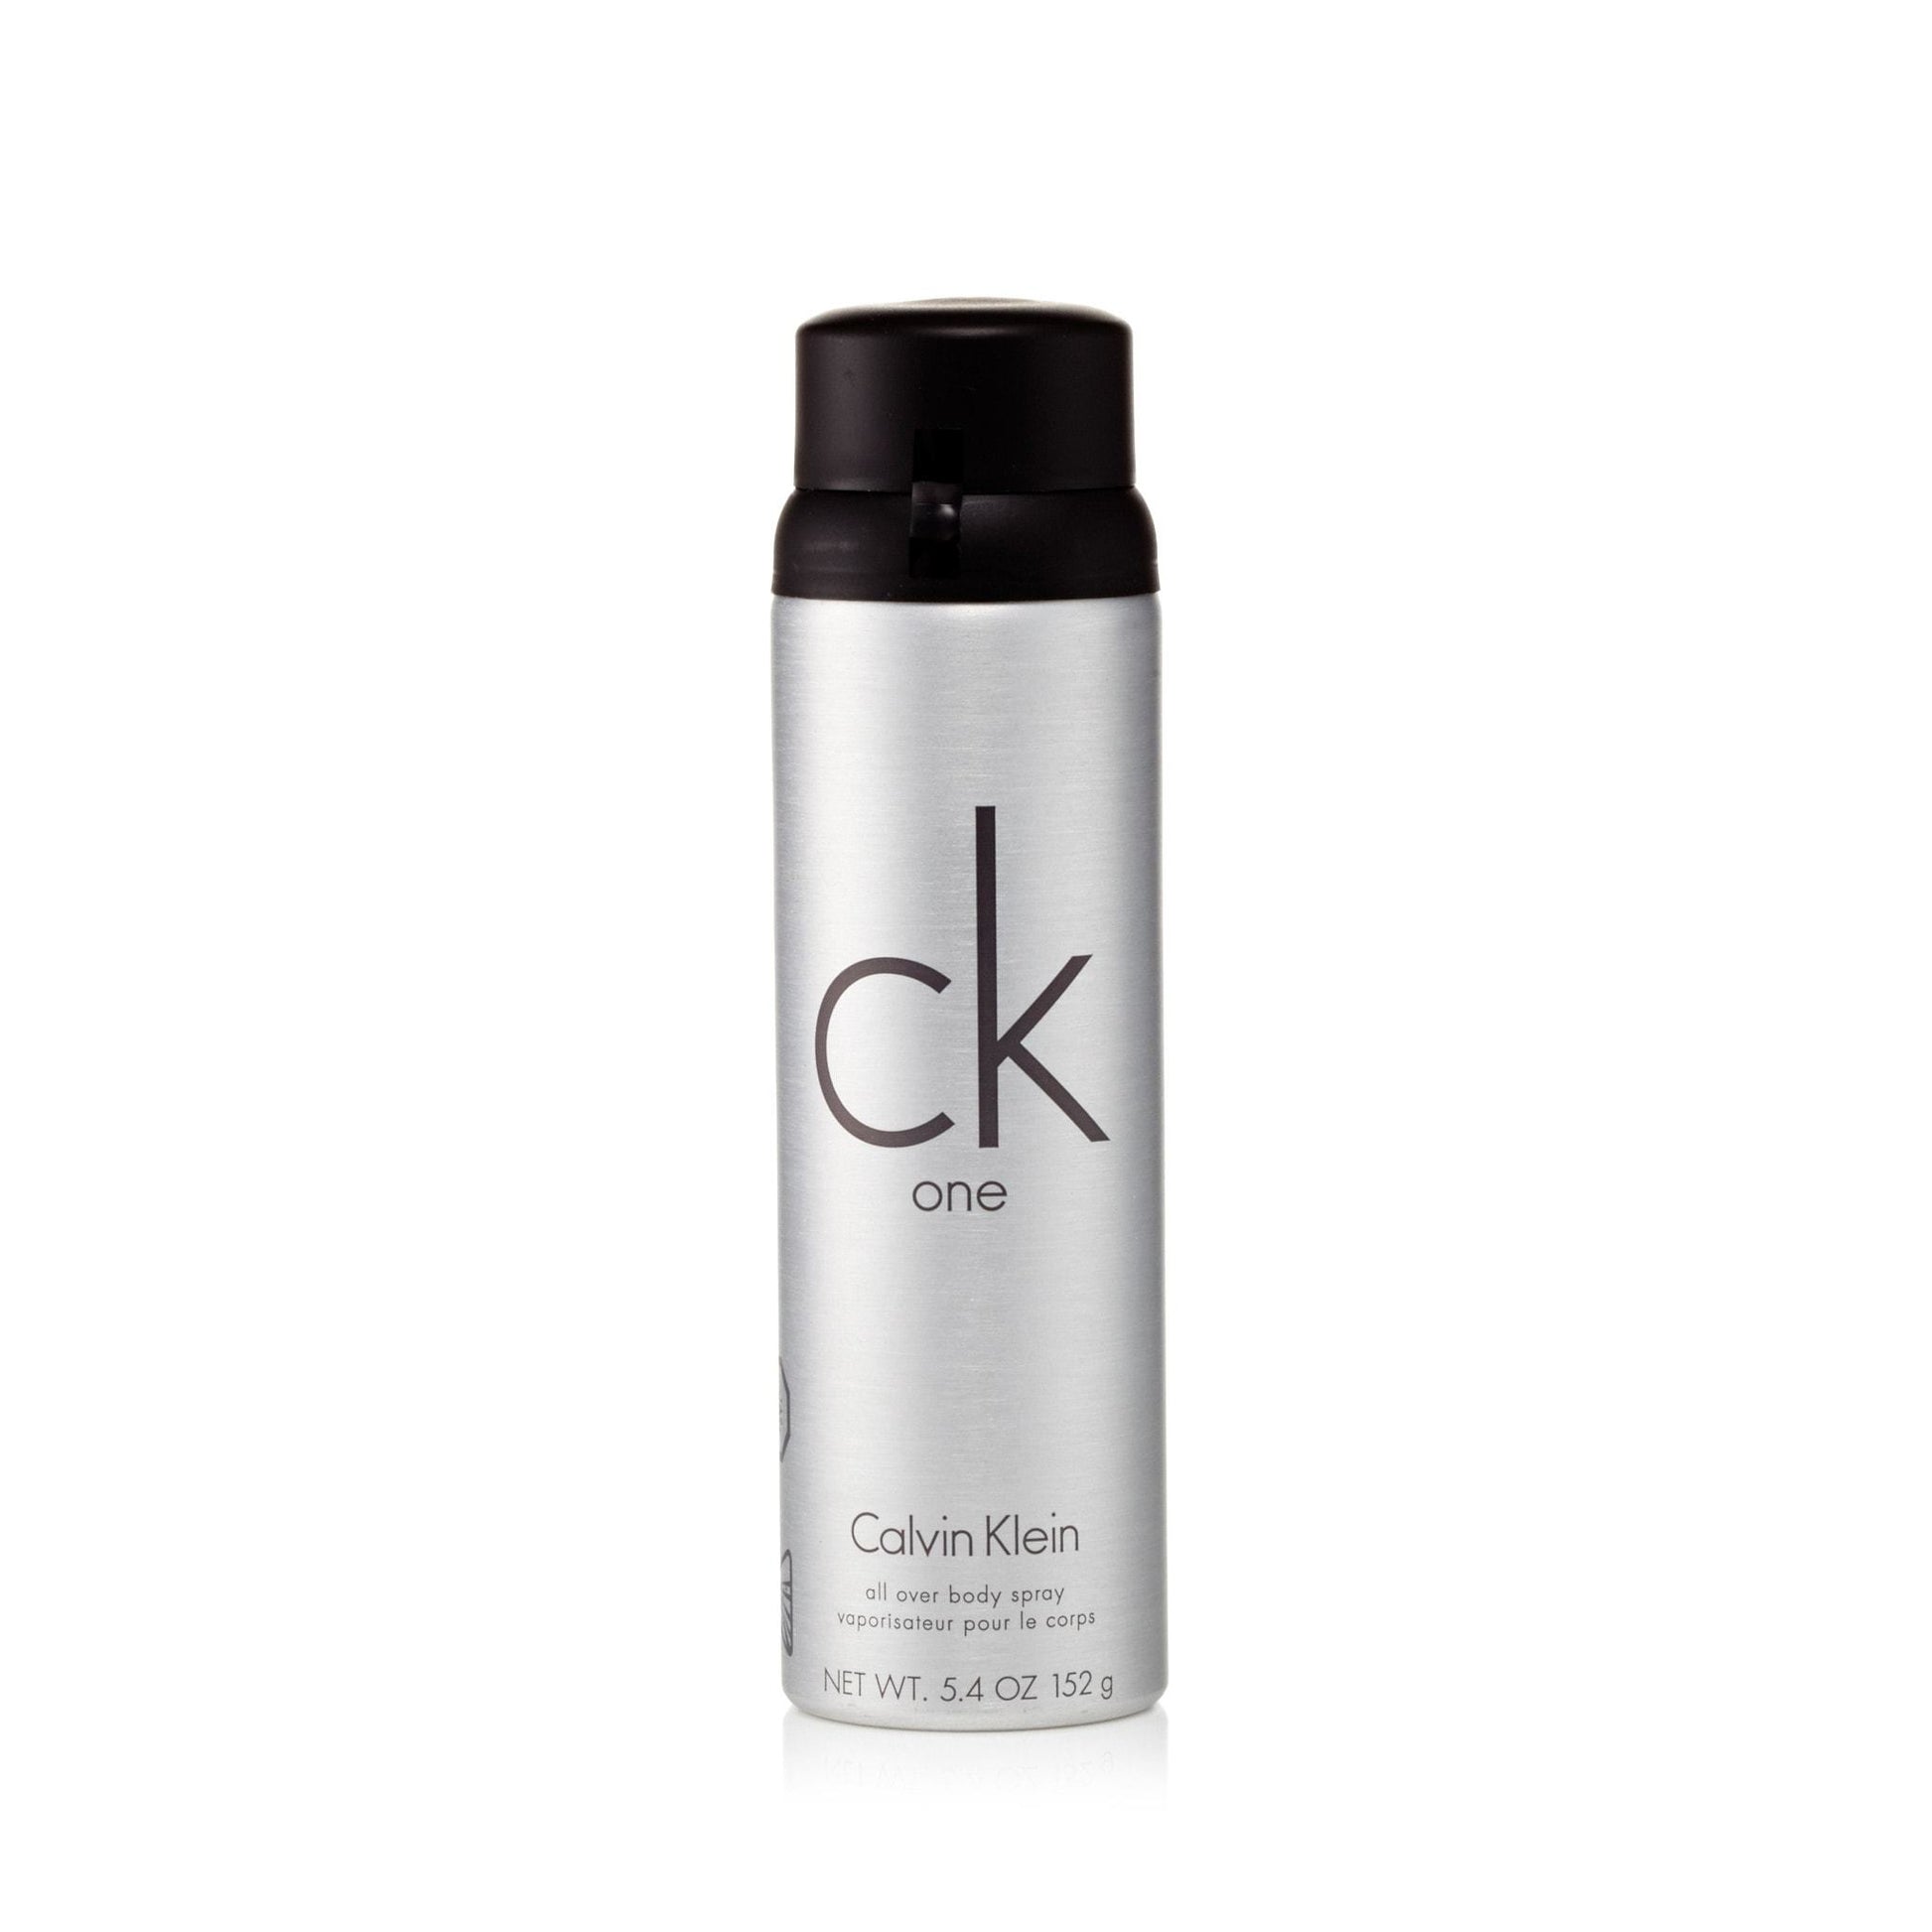 CK ONE Body Spray Unisex by Calvin Klein, Product image 1